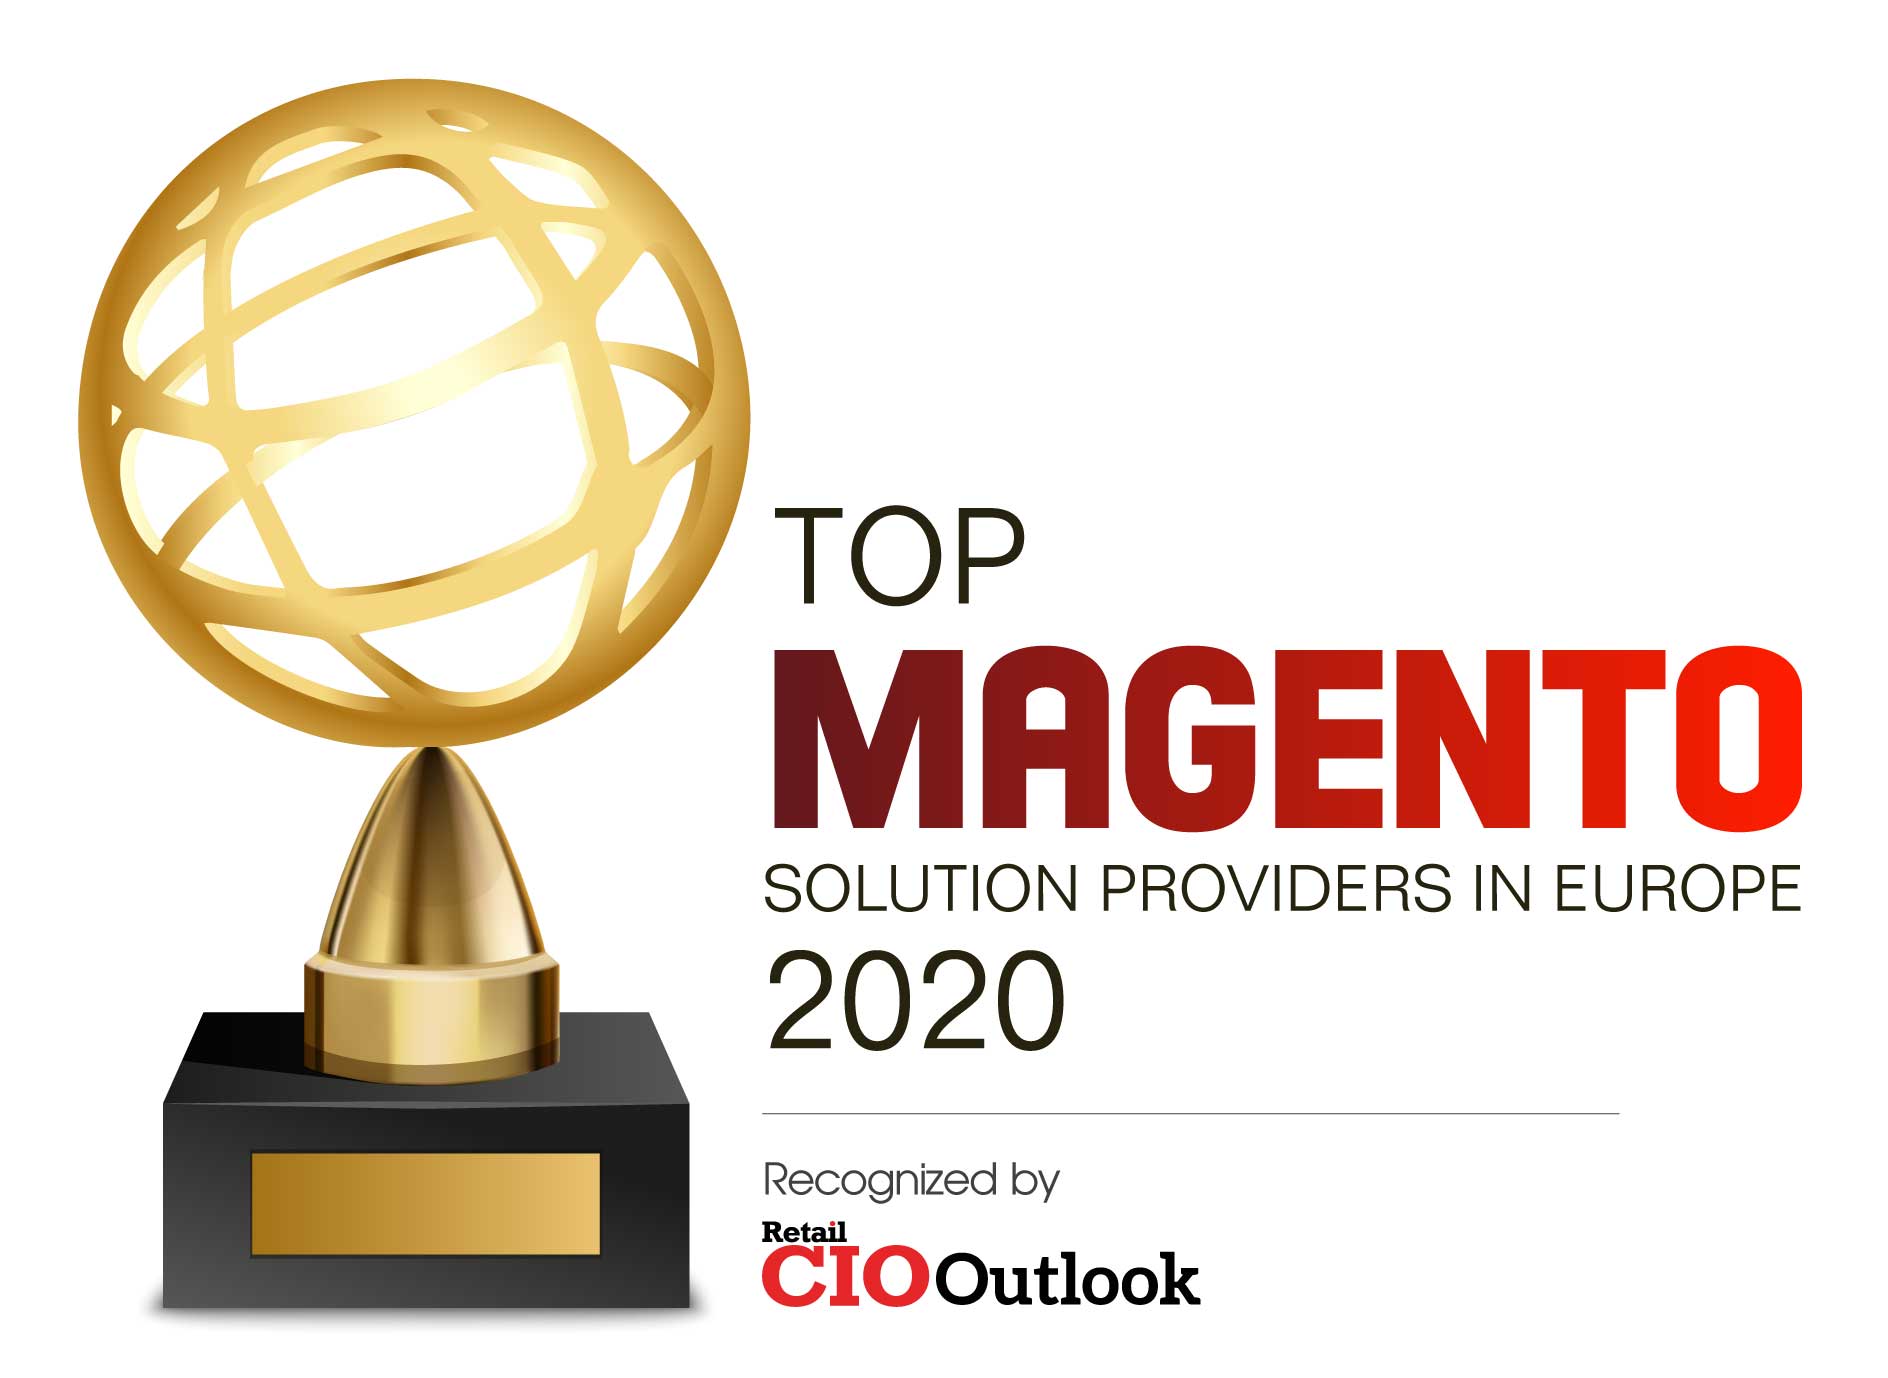 Top 10 Magento Solution Companies in Europe - 2020